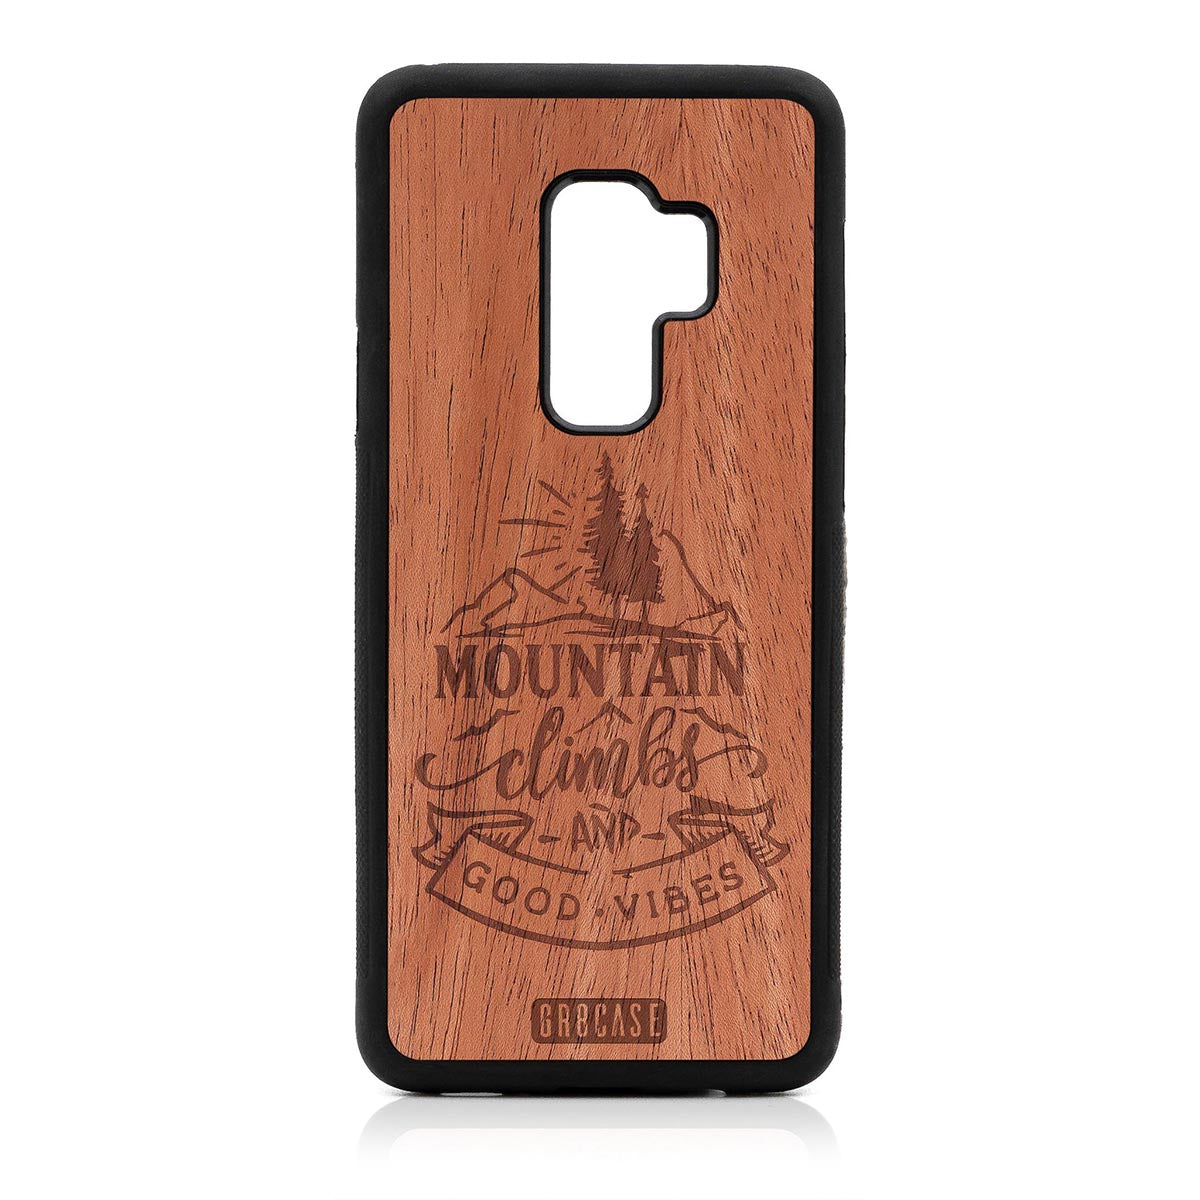 Mountain Climbs And Good Vibes Design Wood Case Samsung Galaxy S9 Plus by GR8CASE